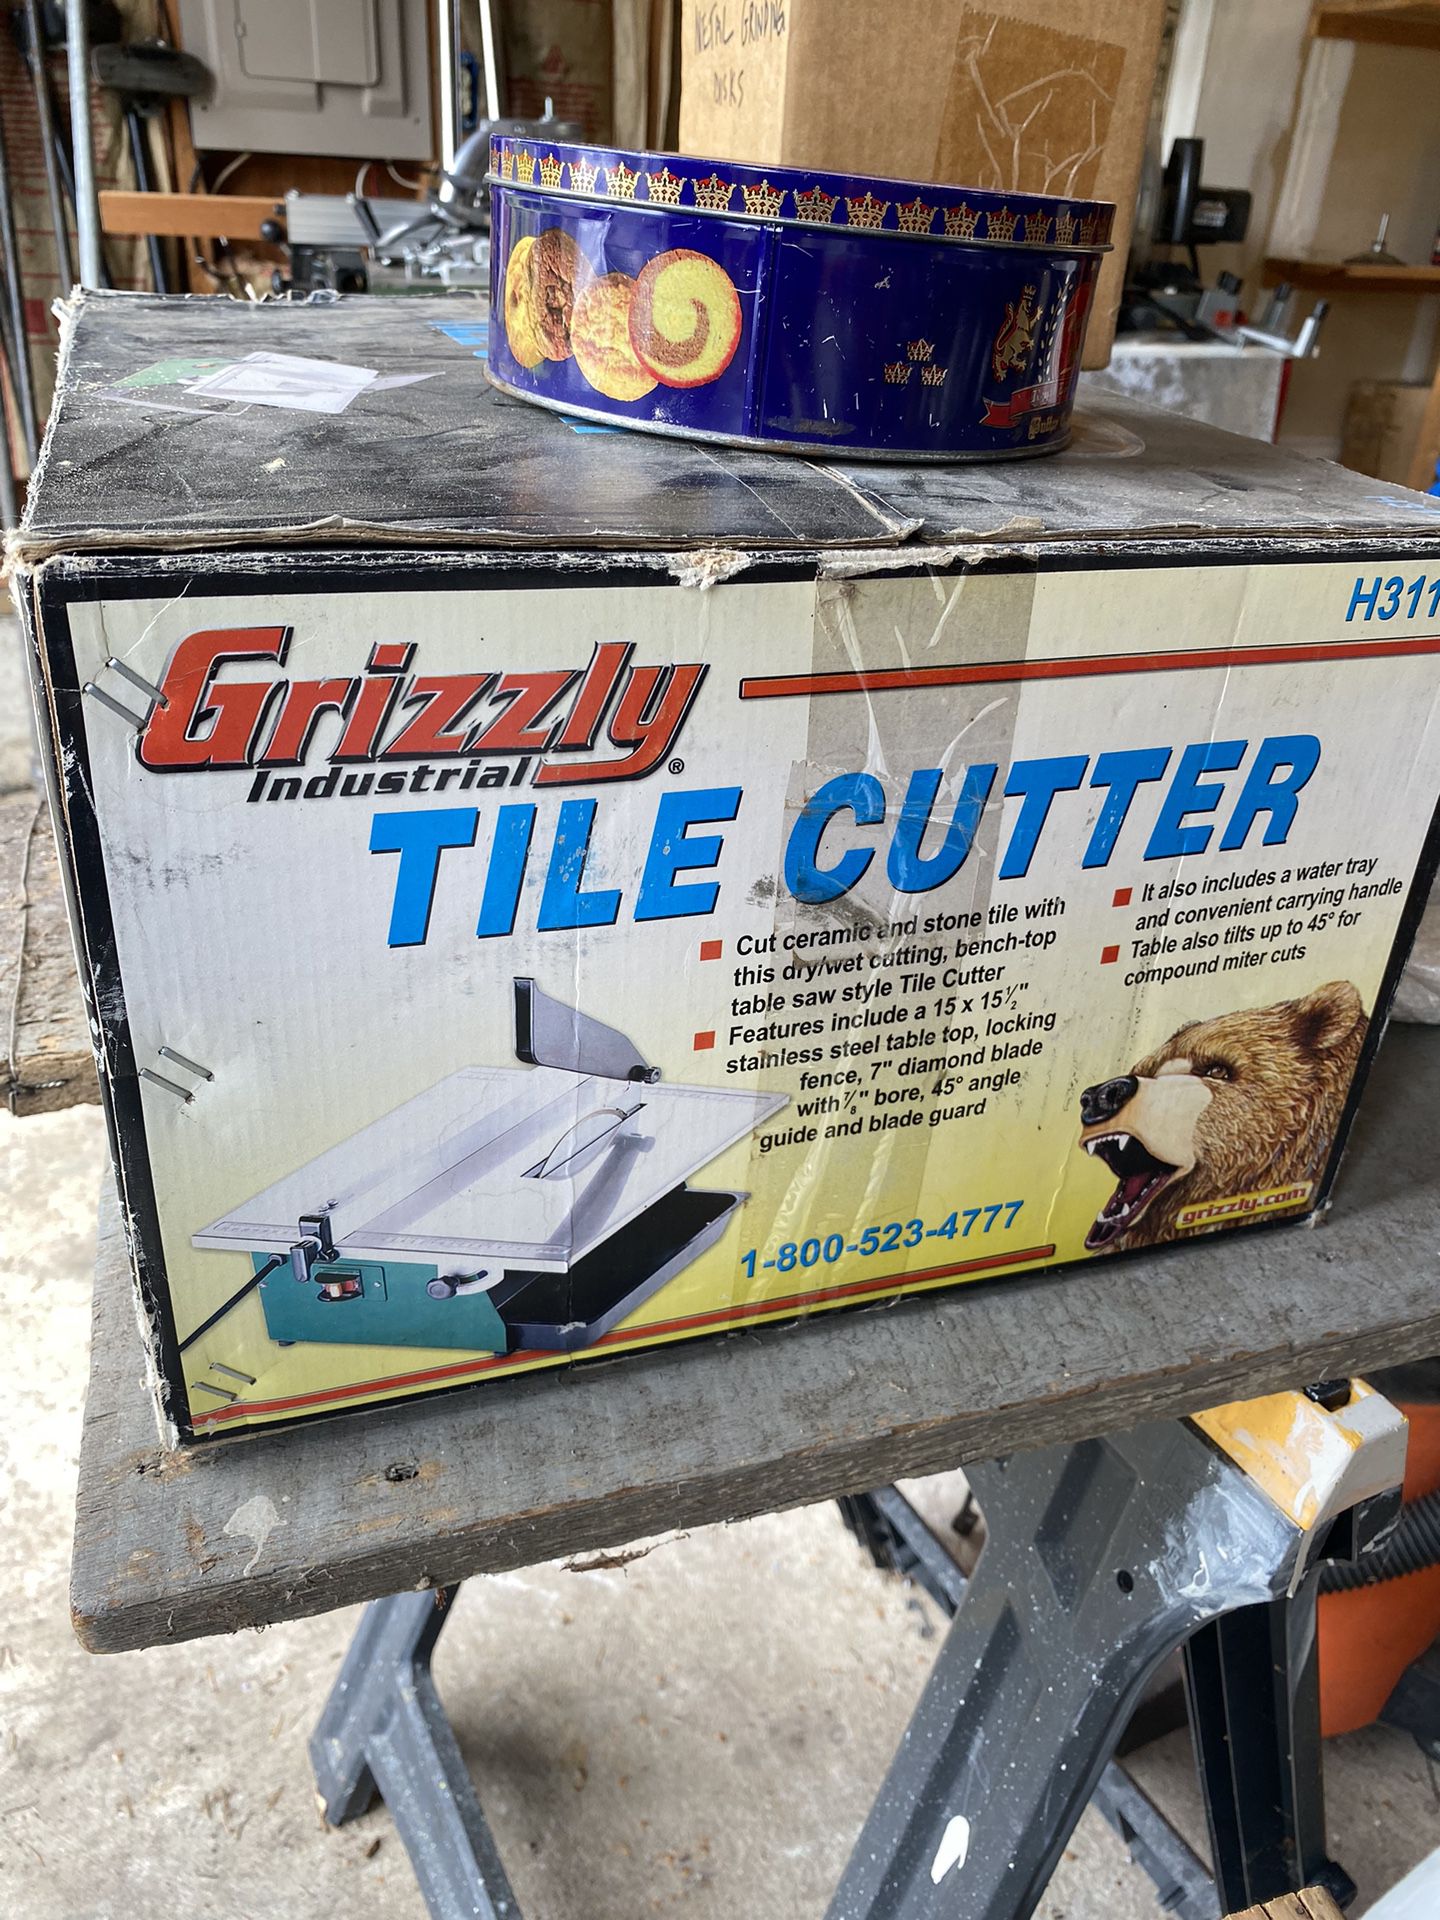 Grizzly Tile Cutter